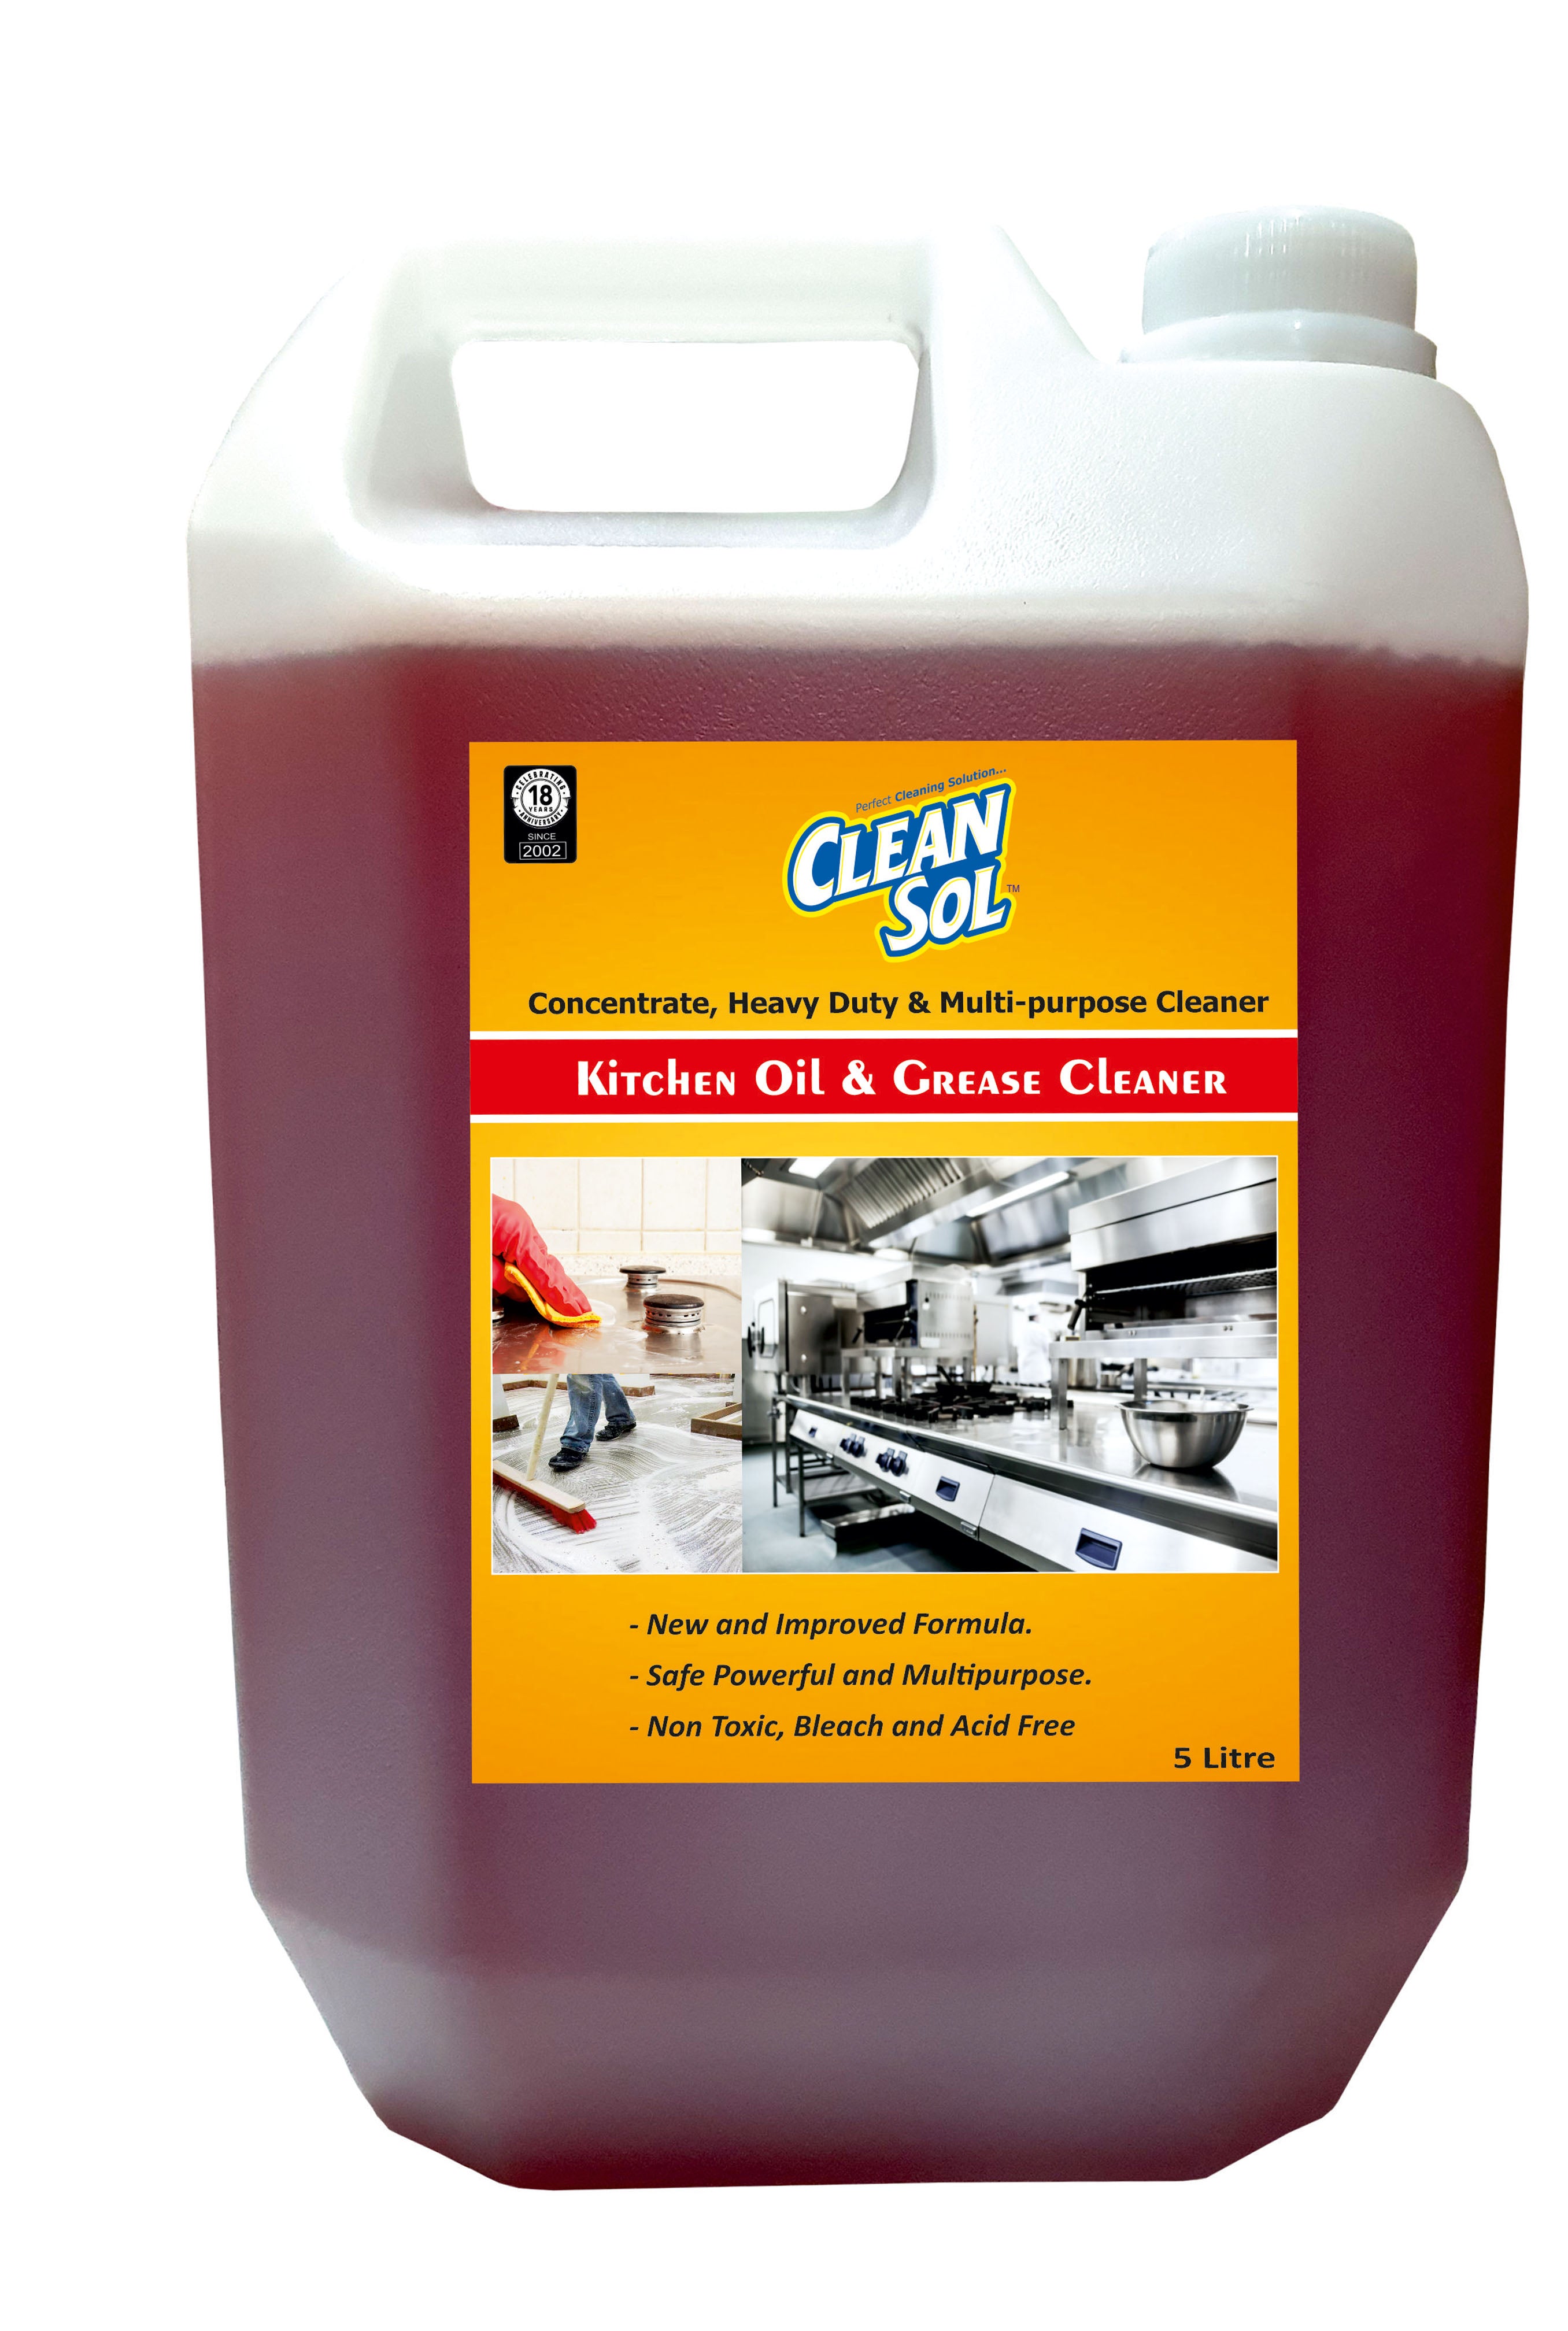 Cleansol Power HD (Kitchen Oil & Grease Cleaner) -1 Ltr